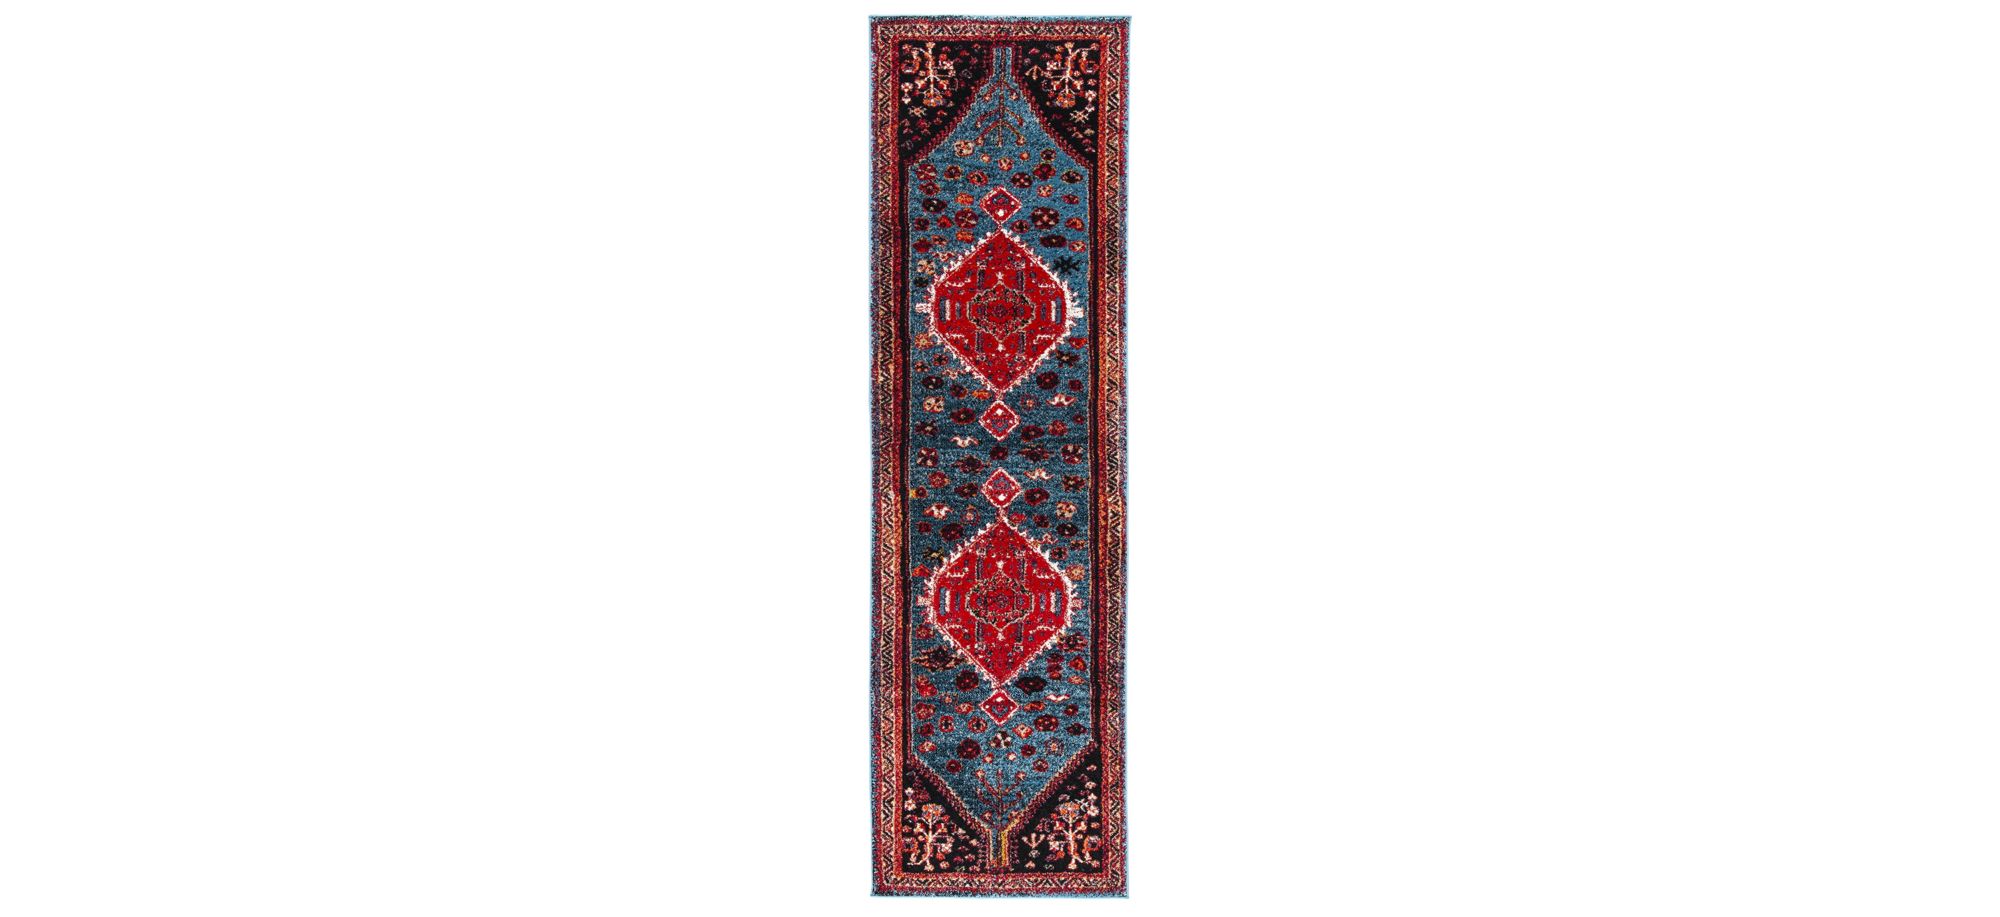 Vintage Hamadan Turquoise Runner Rug in Turquoise & Red by Safavieh